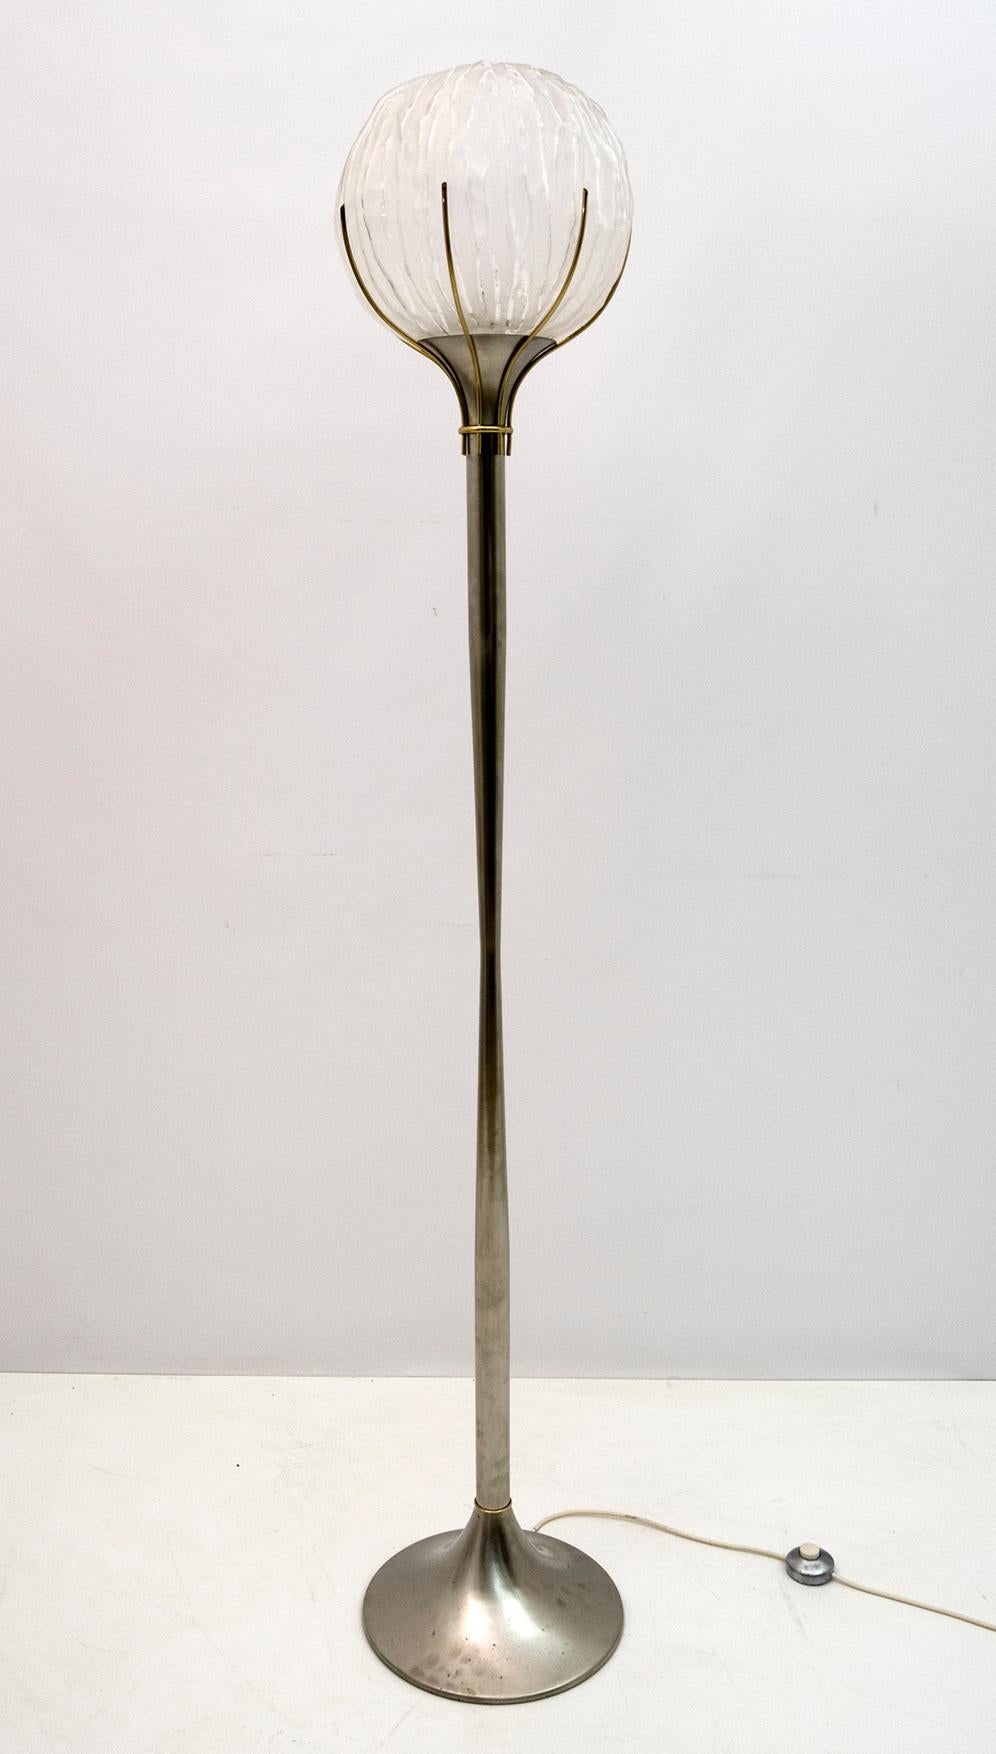 This floor lamp in Corteccia Murano glass and nickel-plated brass, was designed by the famous Italian designer Angelo Brotto for the Esperia glass factory in Murano. Production of the 70s.

Angelo Brotto was a Venetian designer and artist known